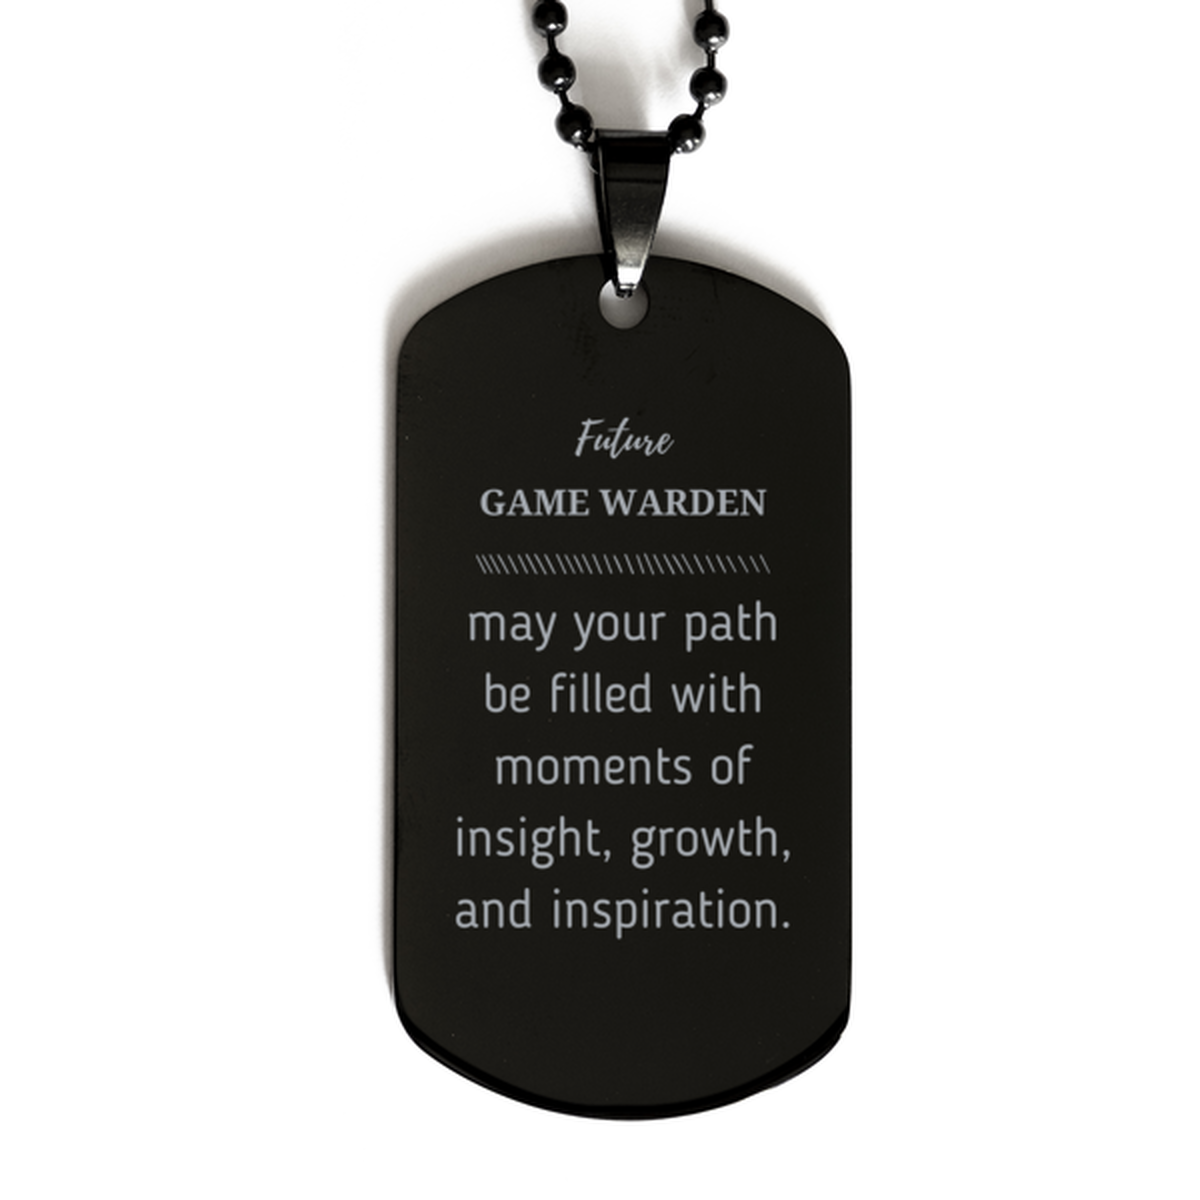 Future Game Warden Gifts, May your path be filled with moments of insight, Graduation Gifts for New Game Warden, Christmas Unique Black Dog Tag For Men, Women, Friends